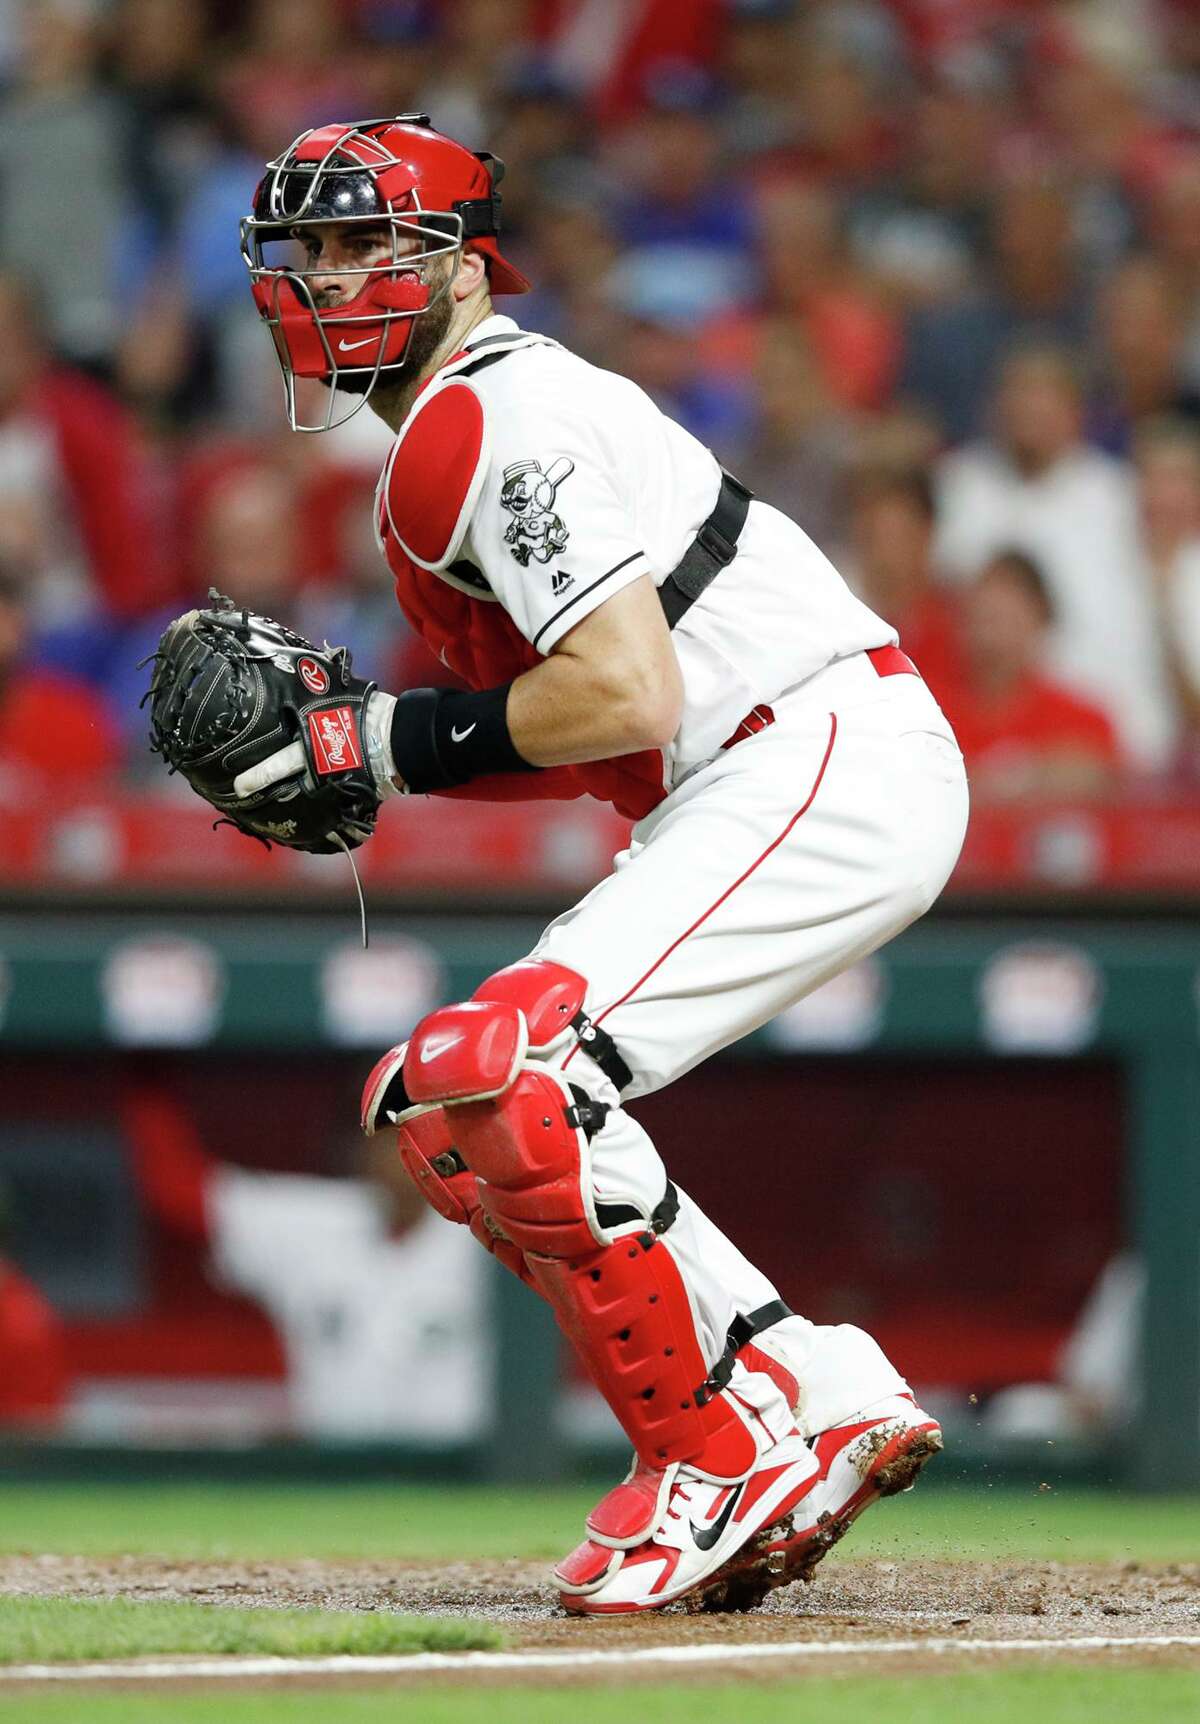 Curt Casali works behind the plate during the game against the Los Angeles Dodgers at Great American Ball Park on September 11, 2018.